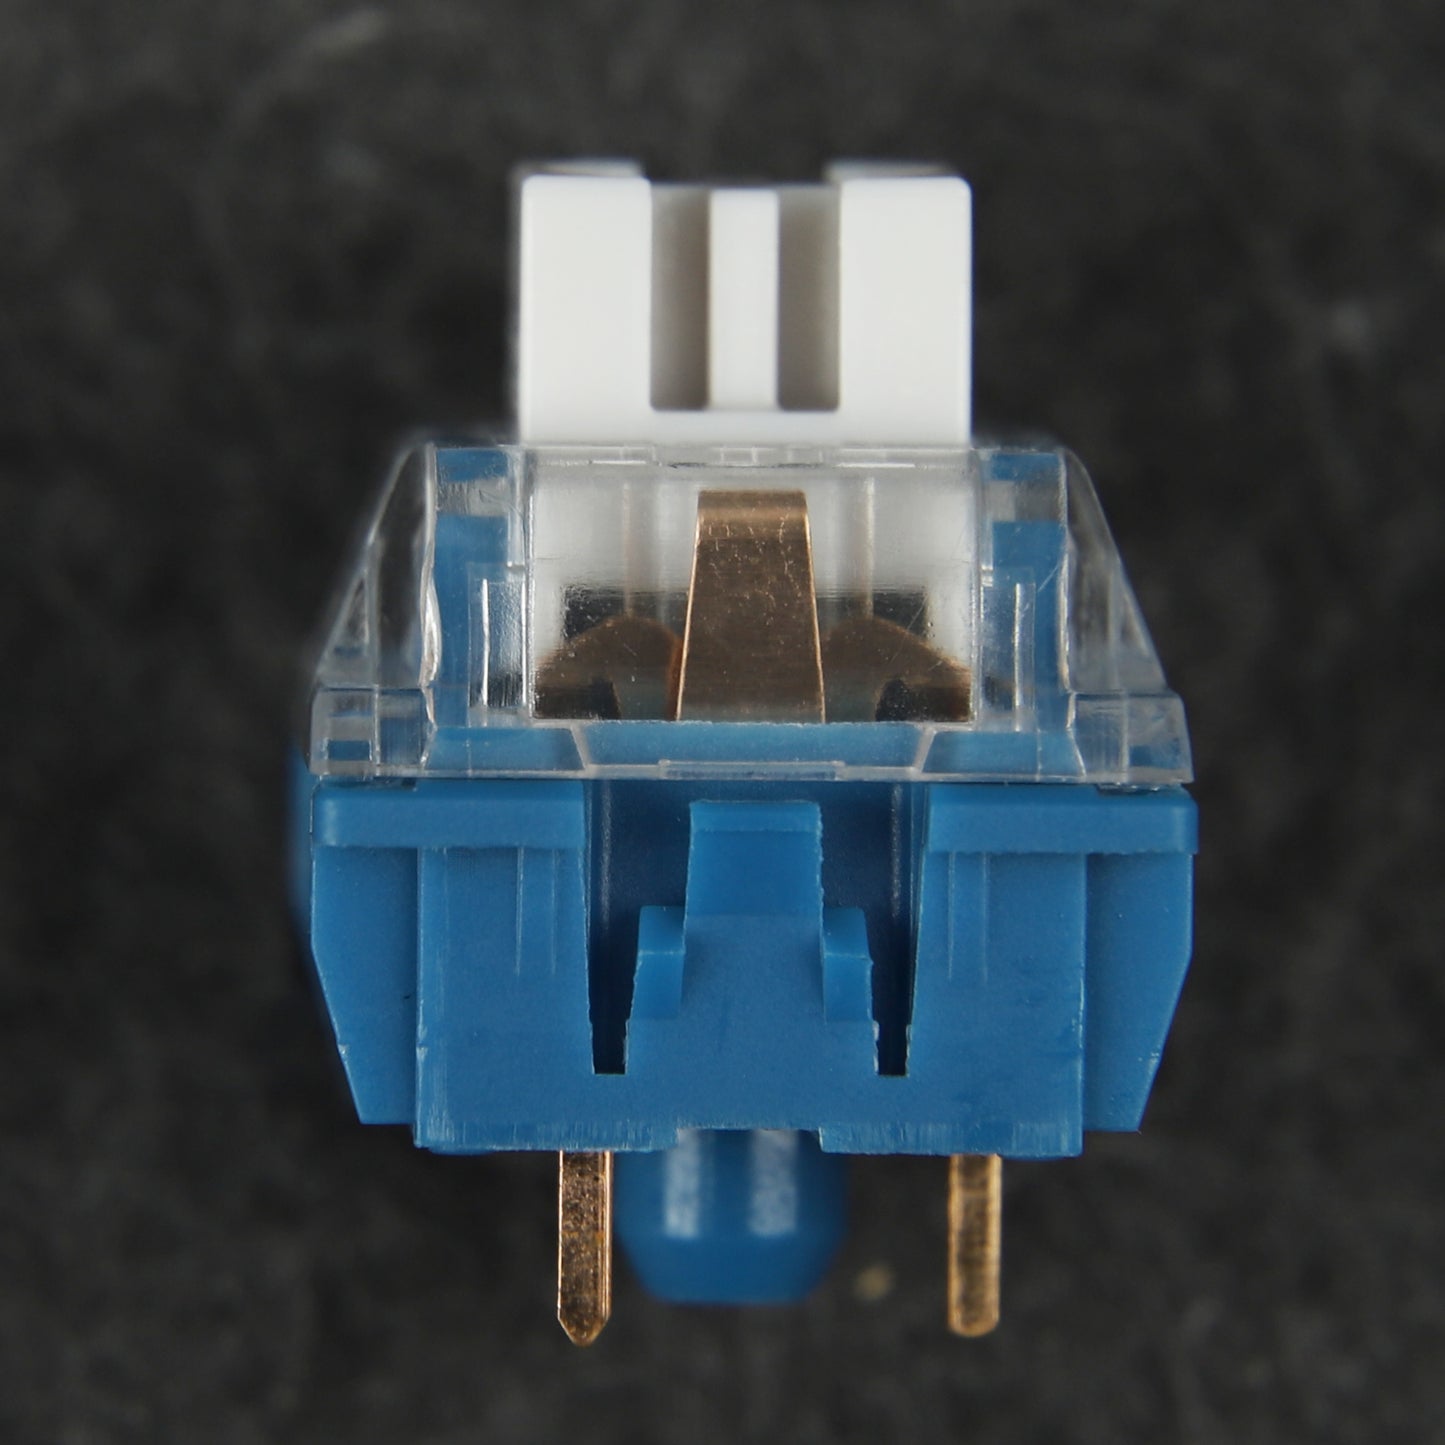 TTC Speed Silver V1 (SMD 3 Pin 45g Linear Switches)